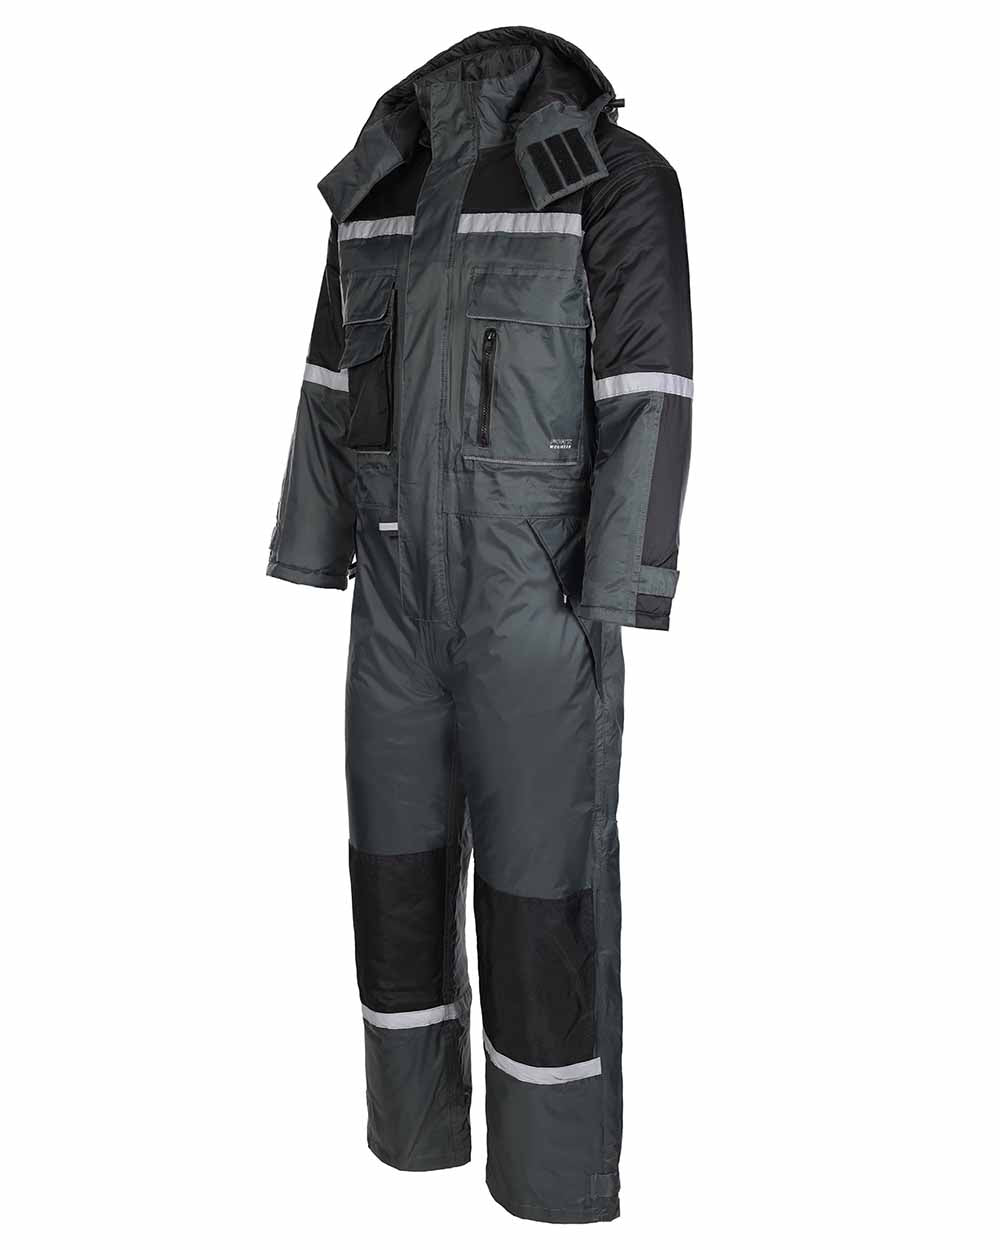 Left side view Reflective strips Fort Orwell Waterproof Padded Boilersuit